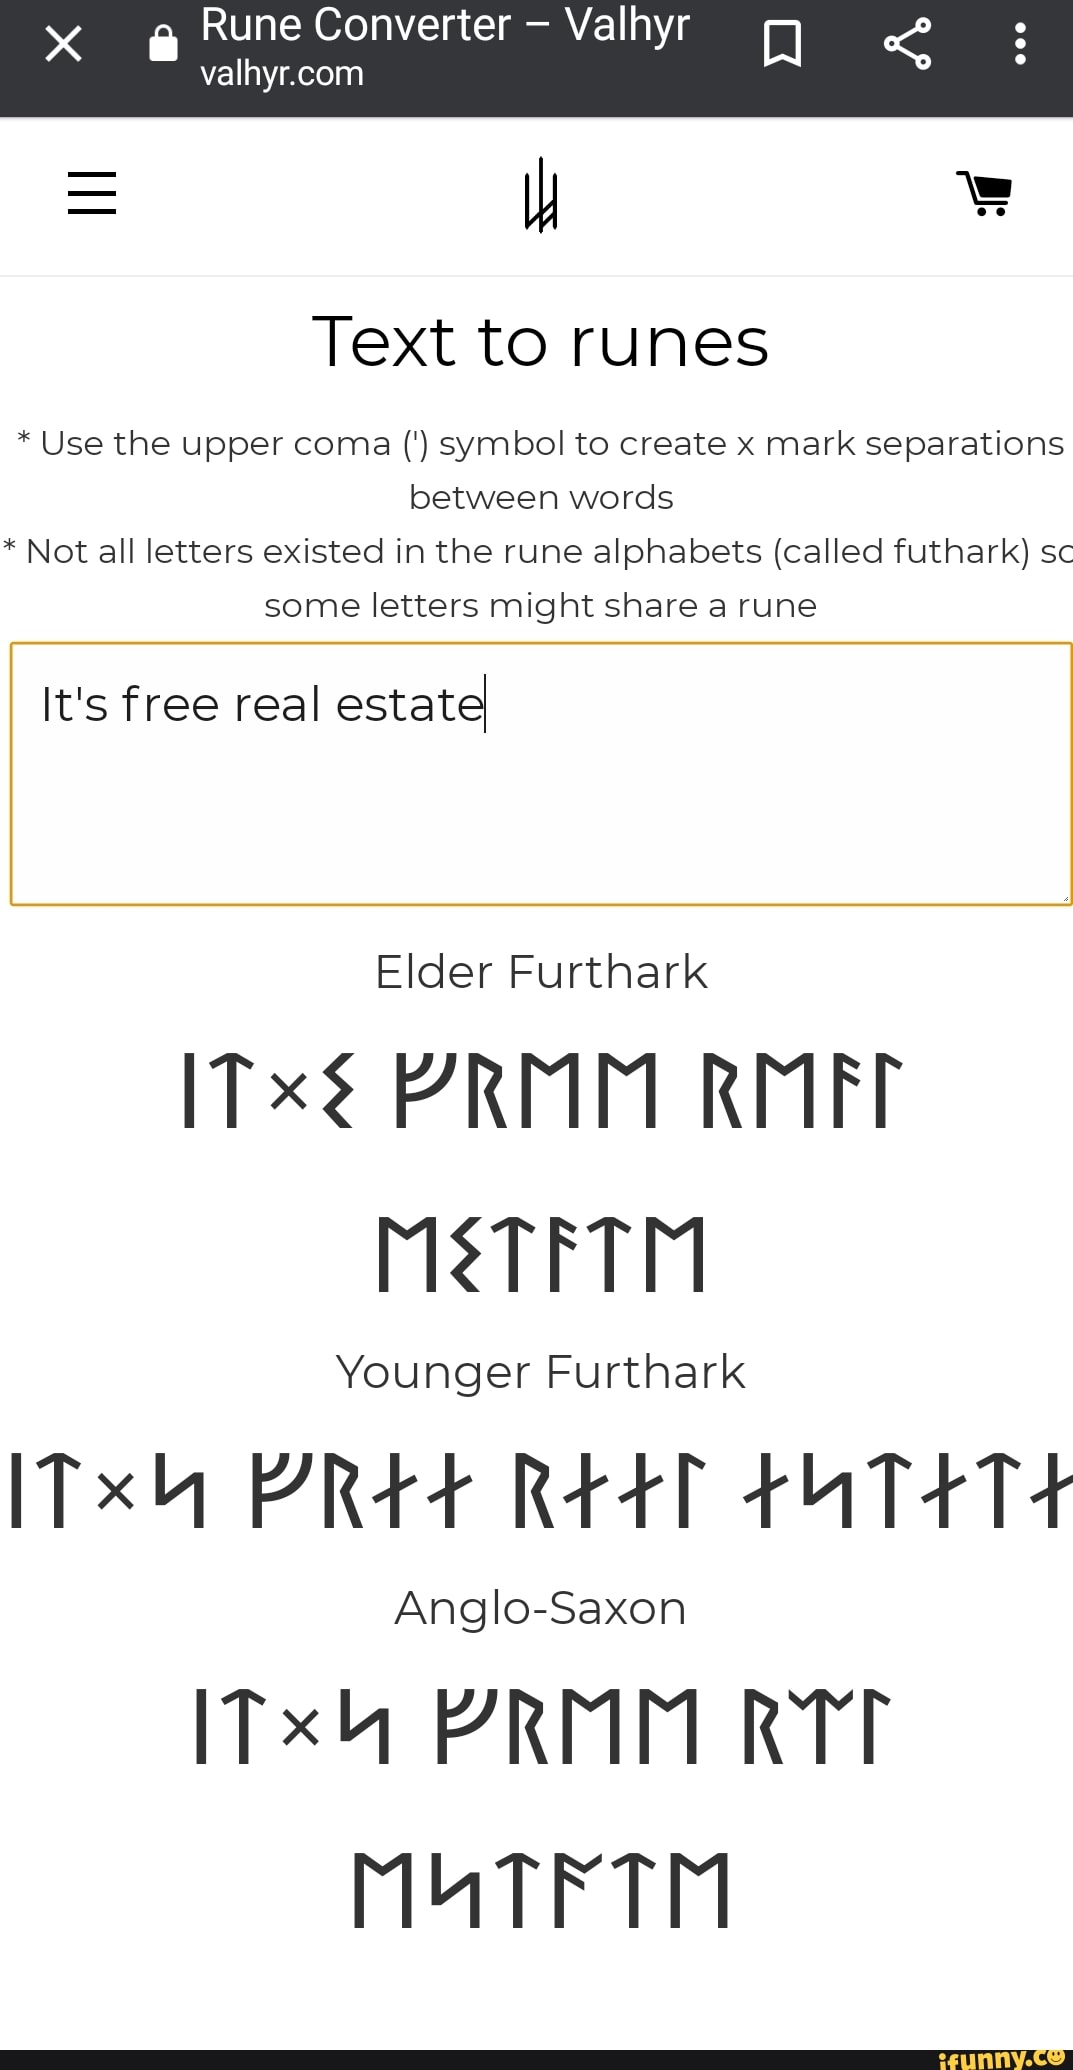 X Rune Converter Valhyr Text To Runes Use The Upper Coma Symbol To Create X Mark Separations Between Words Not All Letters Existed In The Rune Alphabets Called Futhark